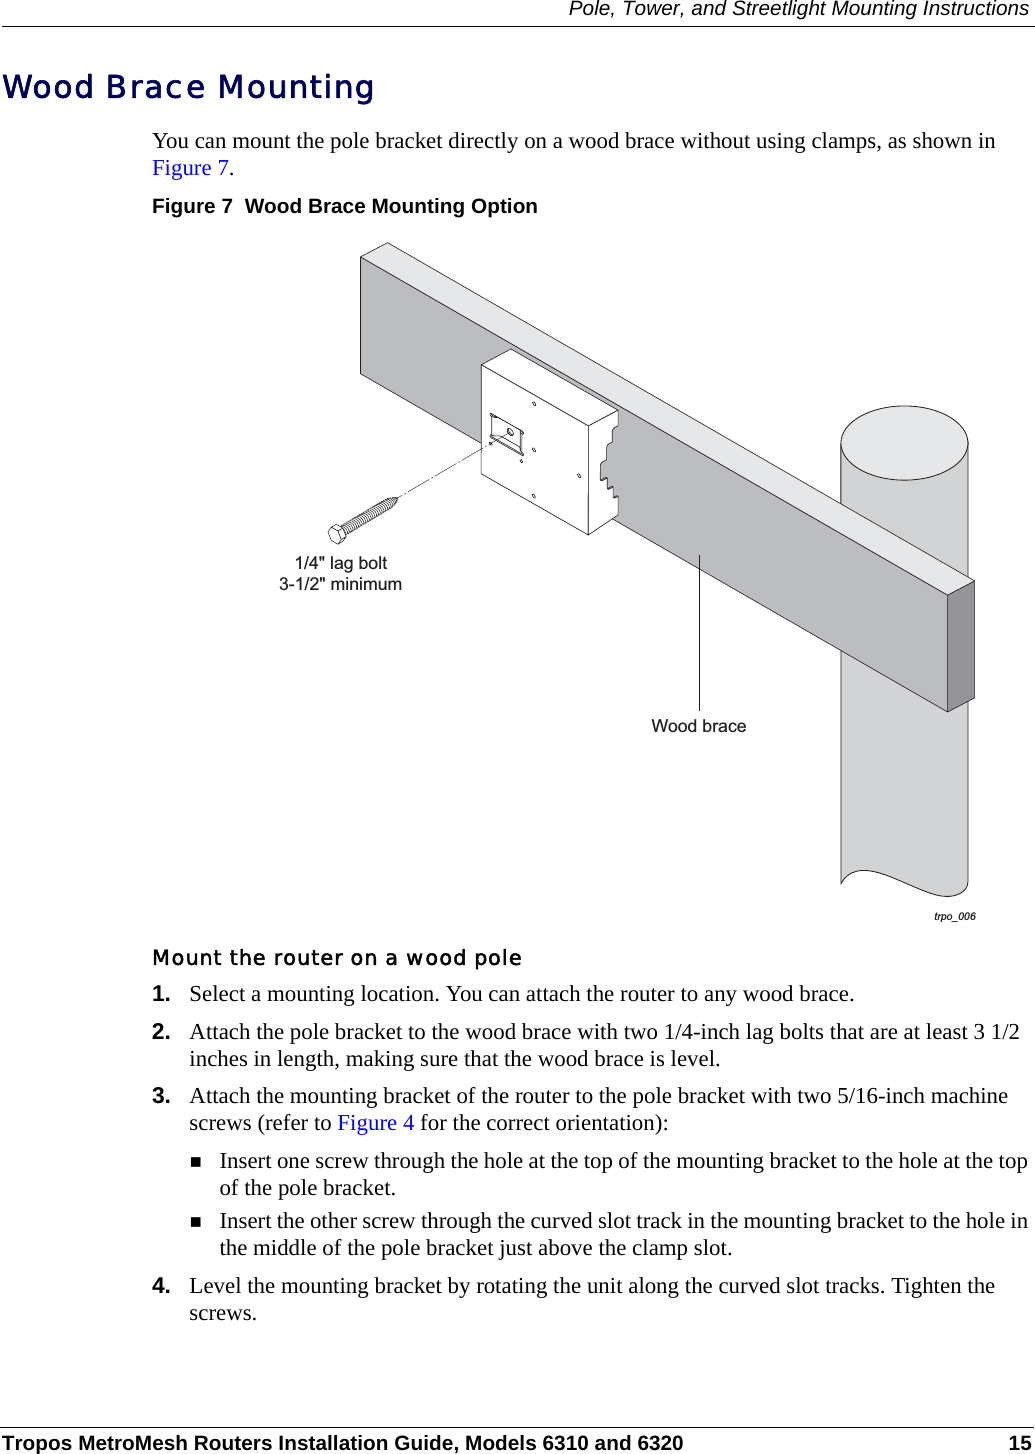 Pole, Tower, and Streetlight Mounting InstructionsTropos MetroMesh Routers Installation Guide, Models 6310 and 6320 15Wood Brace MountingYou can mount the pole bracket directly on a wood brace without using clamps, as shown in Figure 7.Figure 7  Wood Brace Mounting OptionMount the router on a wood pole1. Select a mounting location. You can attach the router to any wood brace. 2. Attach the pole bracket to the wood brace with two 1/4-inch lag bolts that are at least 3 1/2 inches in length, making sure that the wood brace is level. 3. Attach the mounting bracket of the router to the pole bracket with two 5/16-inch machine screws (refer to Figure 4 for the correct orientation):Insert one screw through the hole at the top of the mounting bracket to the hole at the top of the pole bracket.Insert the other screw through the curved slot track in the mounting bracket to the hole in the middle of the pole bracket just above the clamp slot.4. Level the mounting bracket by rotating the unit along the curved slot tracks. Tighten the screws.trpo_006Wood brace1/4&quot; lag bolt3-1/2&quot; minimum